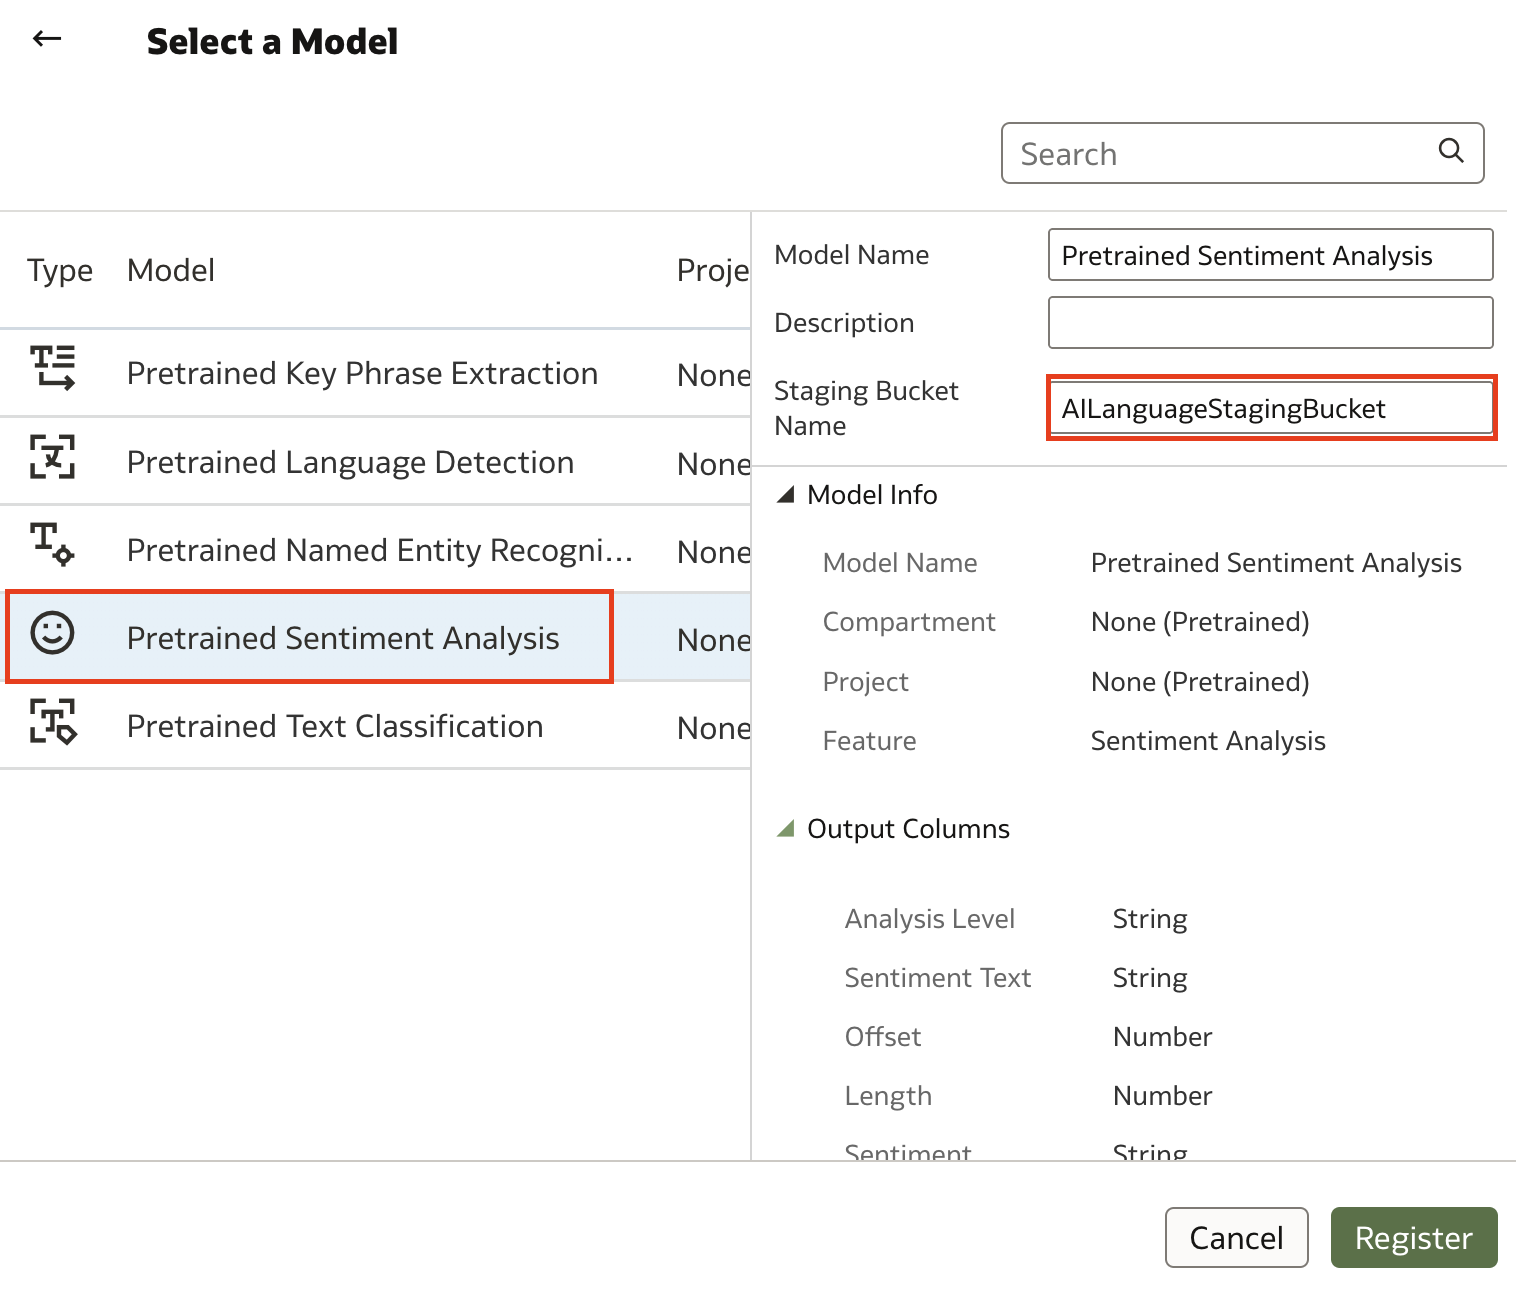 Select pre-trained sentiment analysis model